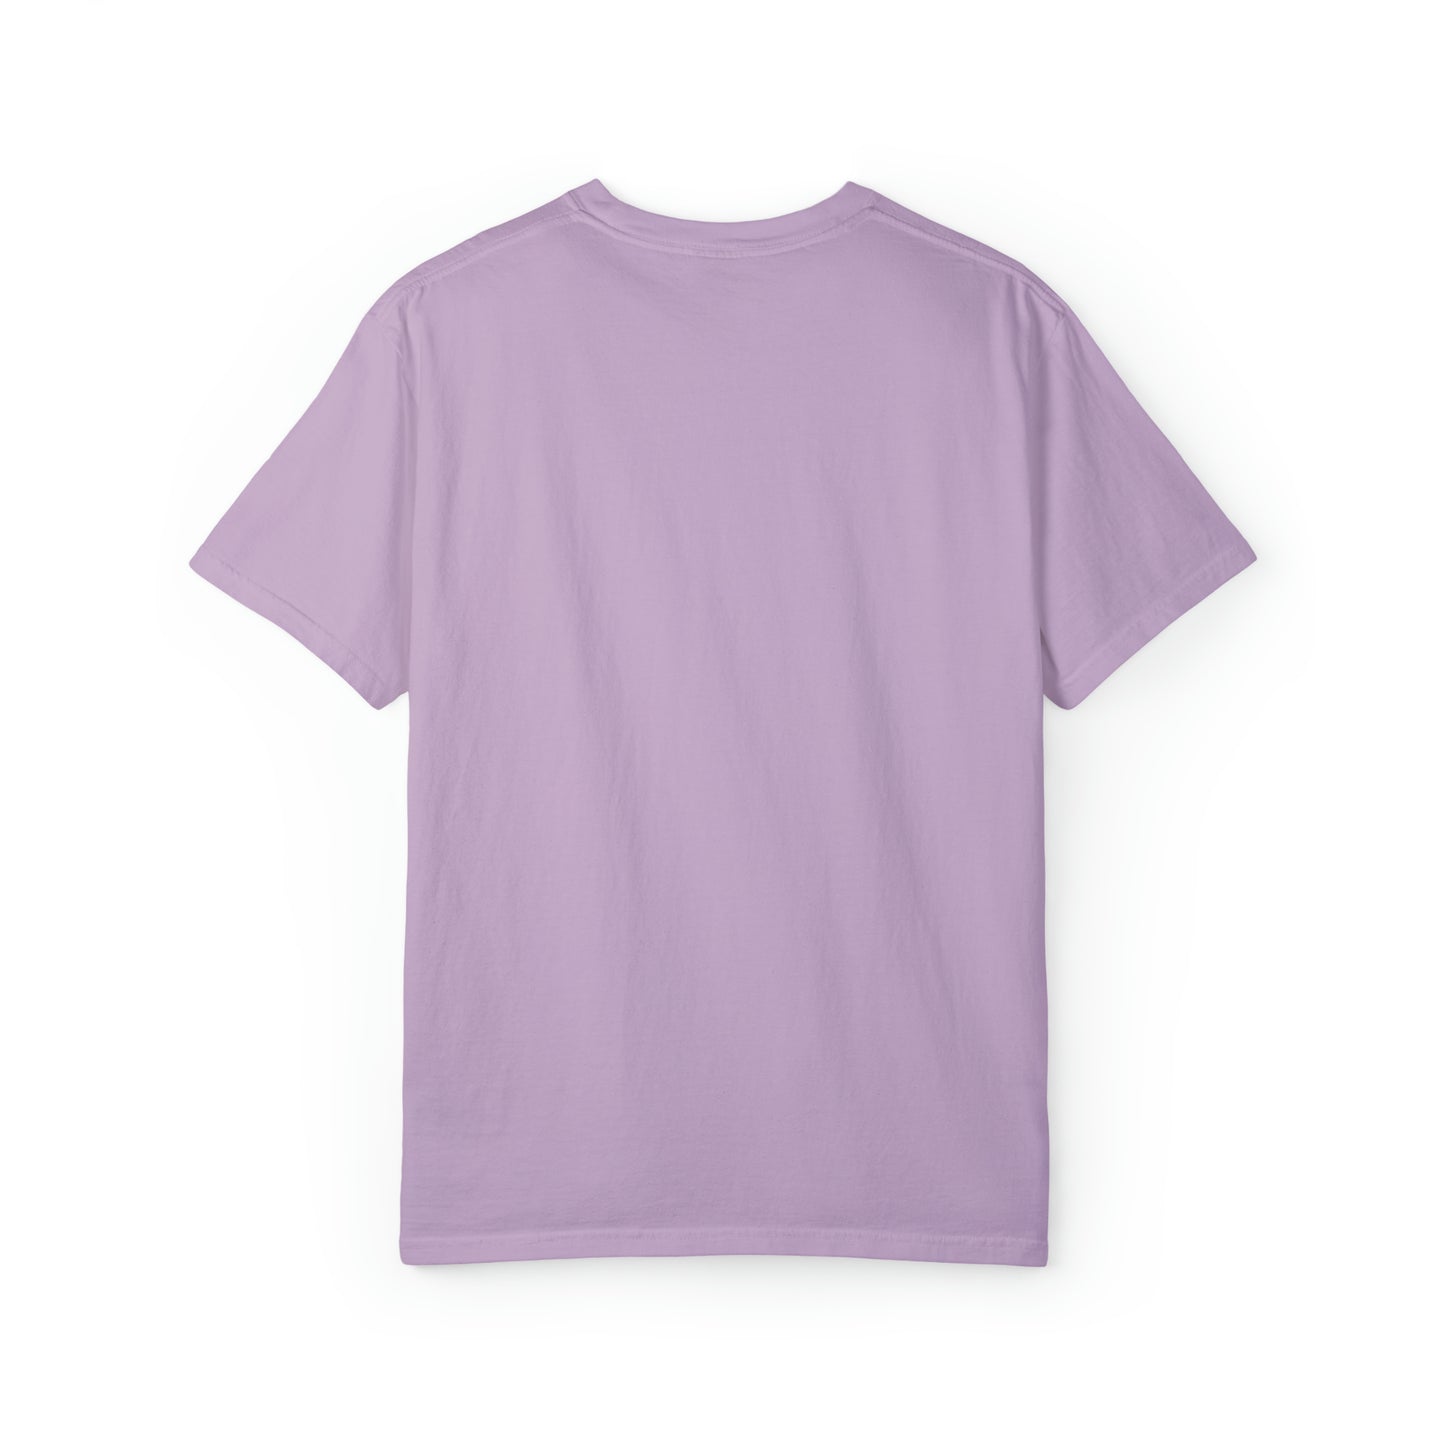 Adult Mouse Ears DL/MK Version Tee - Comfort Colors